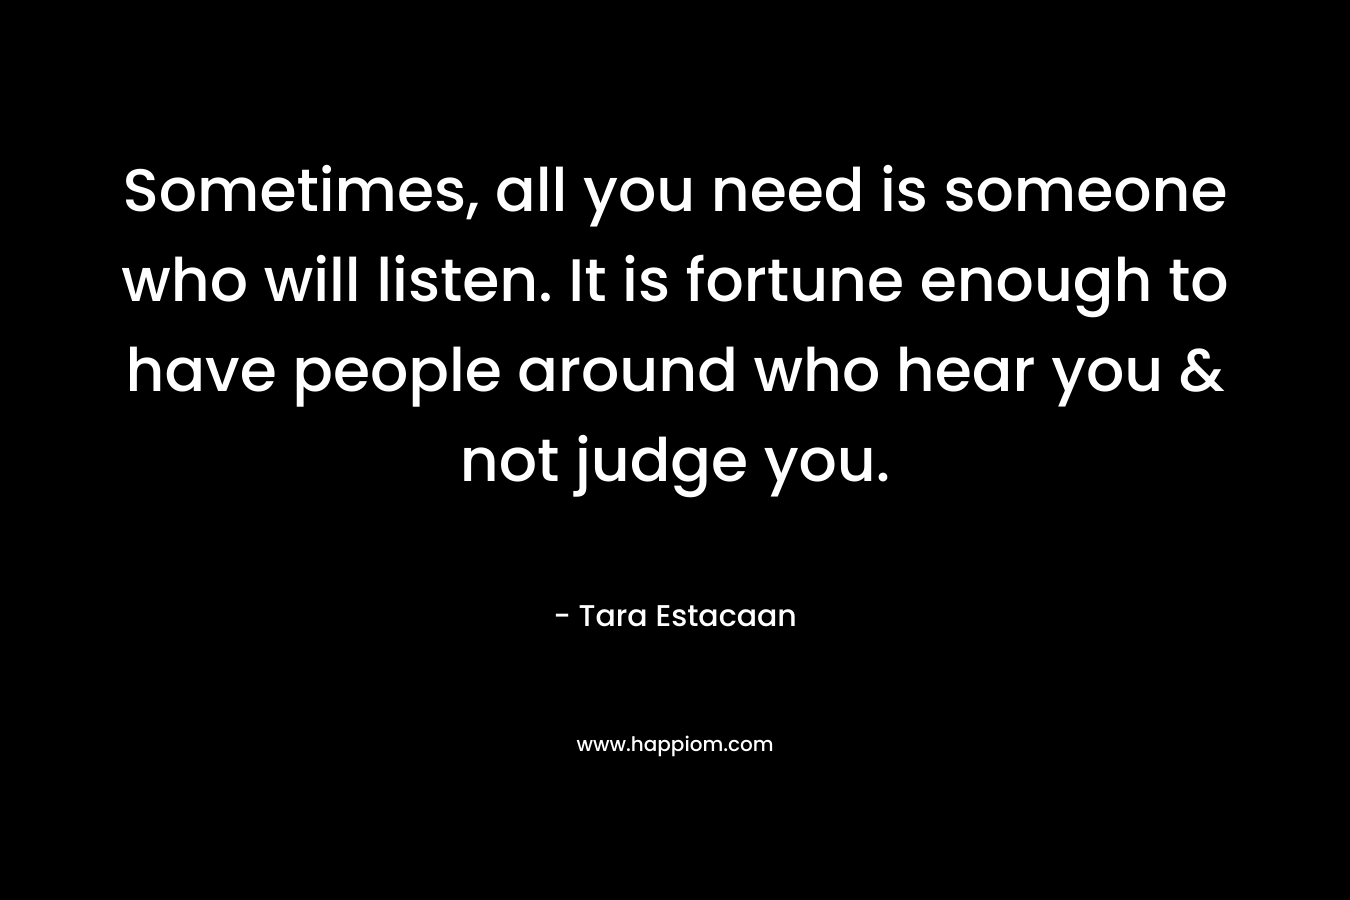 Sometimes, all you need is someone who will listen. It is fortune enough to have people around who hear you & not judge you.